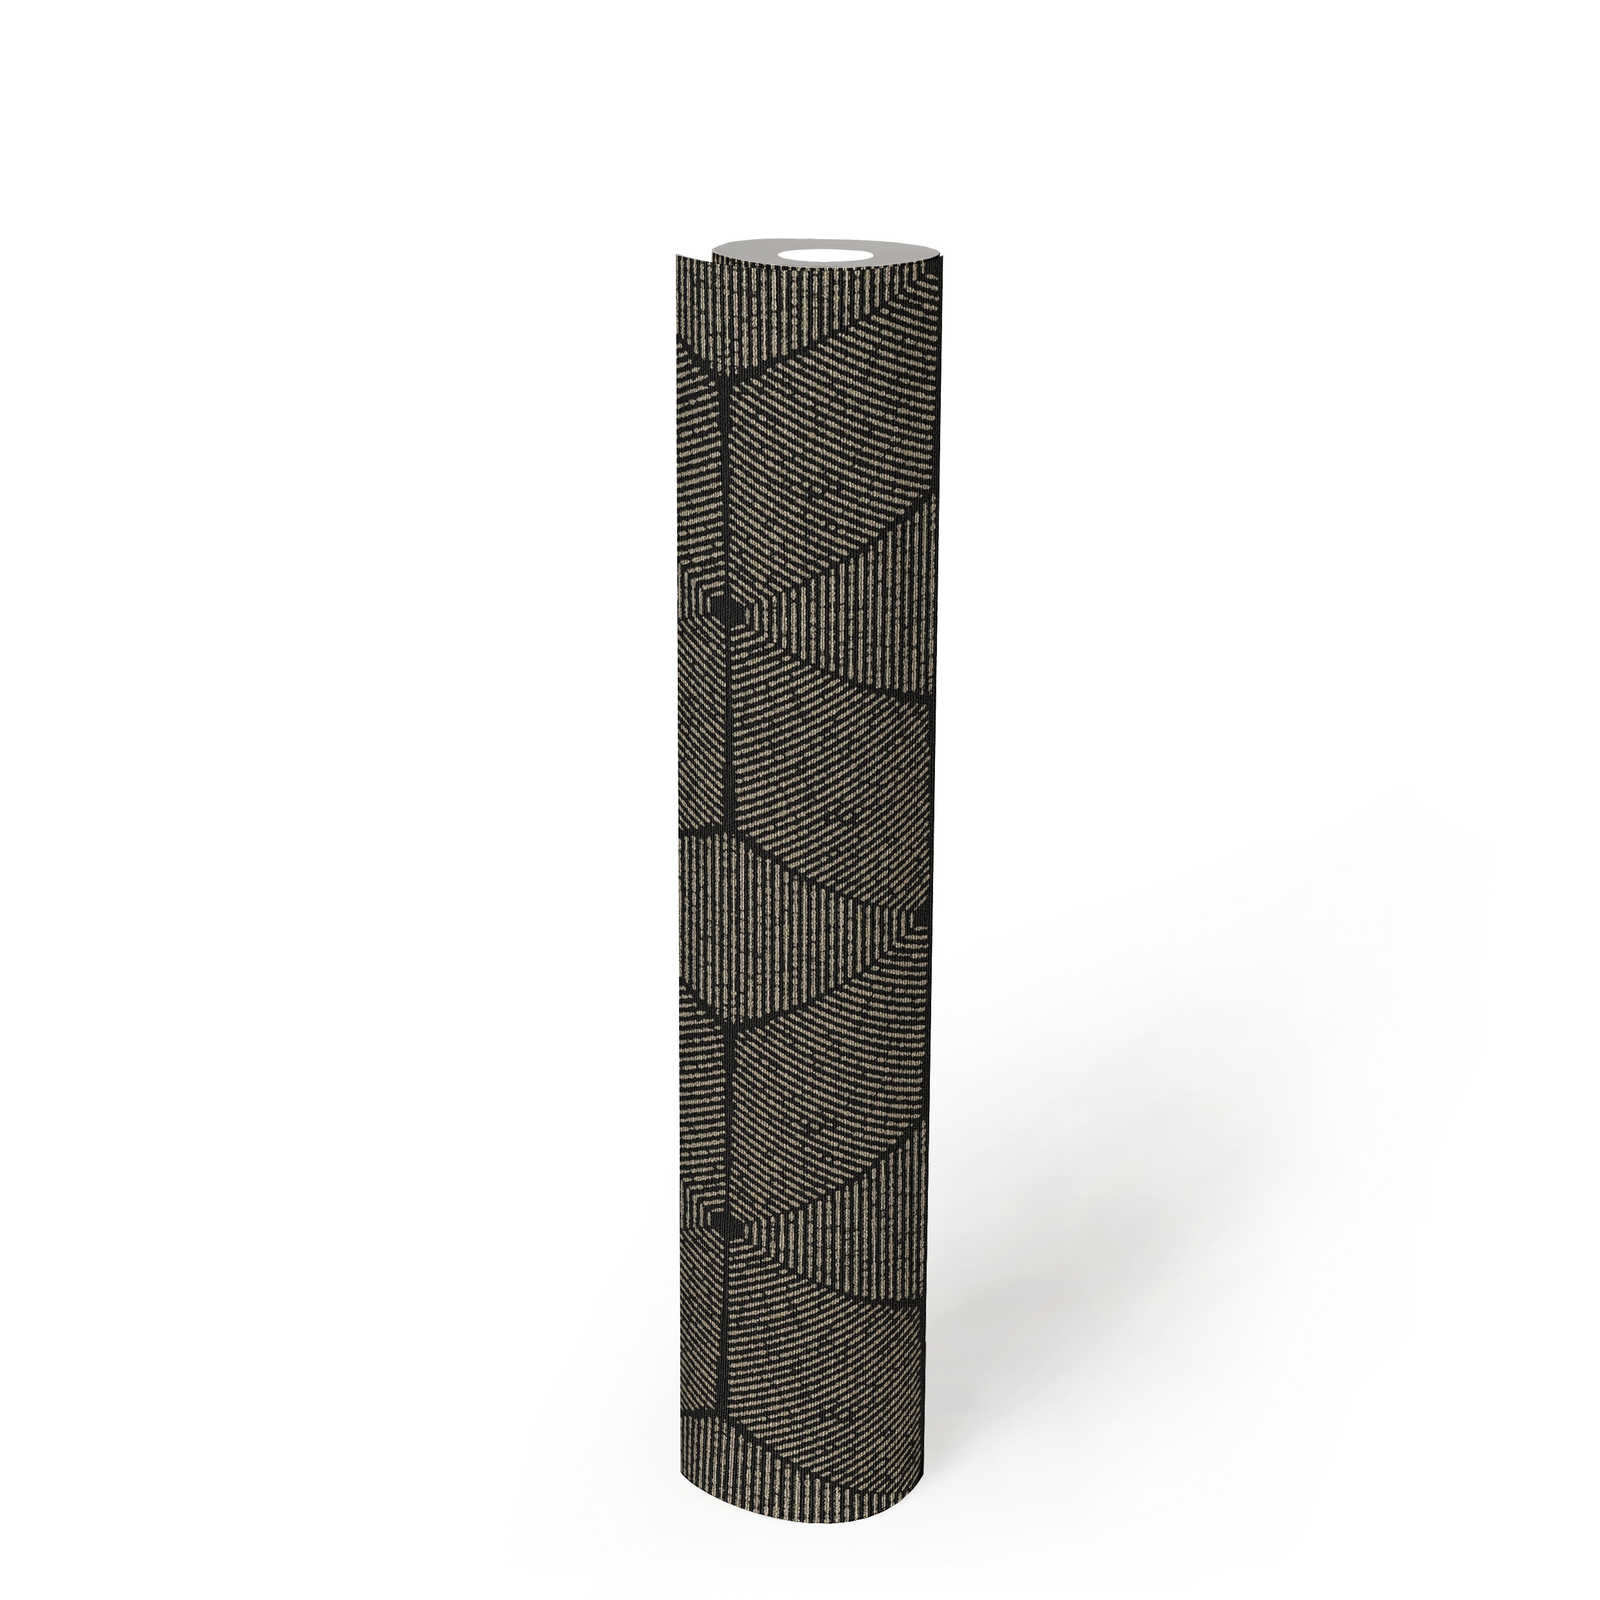             Non-woven wallpaper in a slightly shiny pattern - black, gold
        